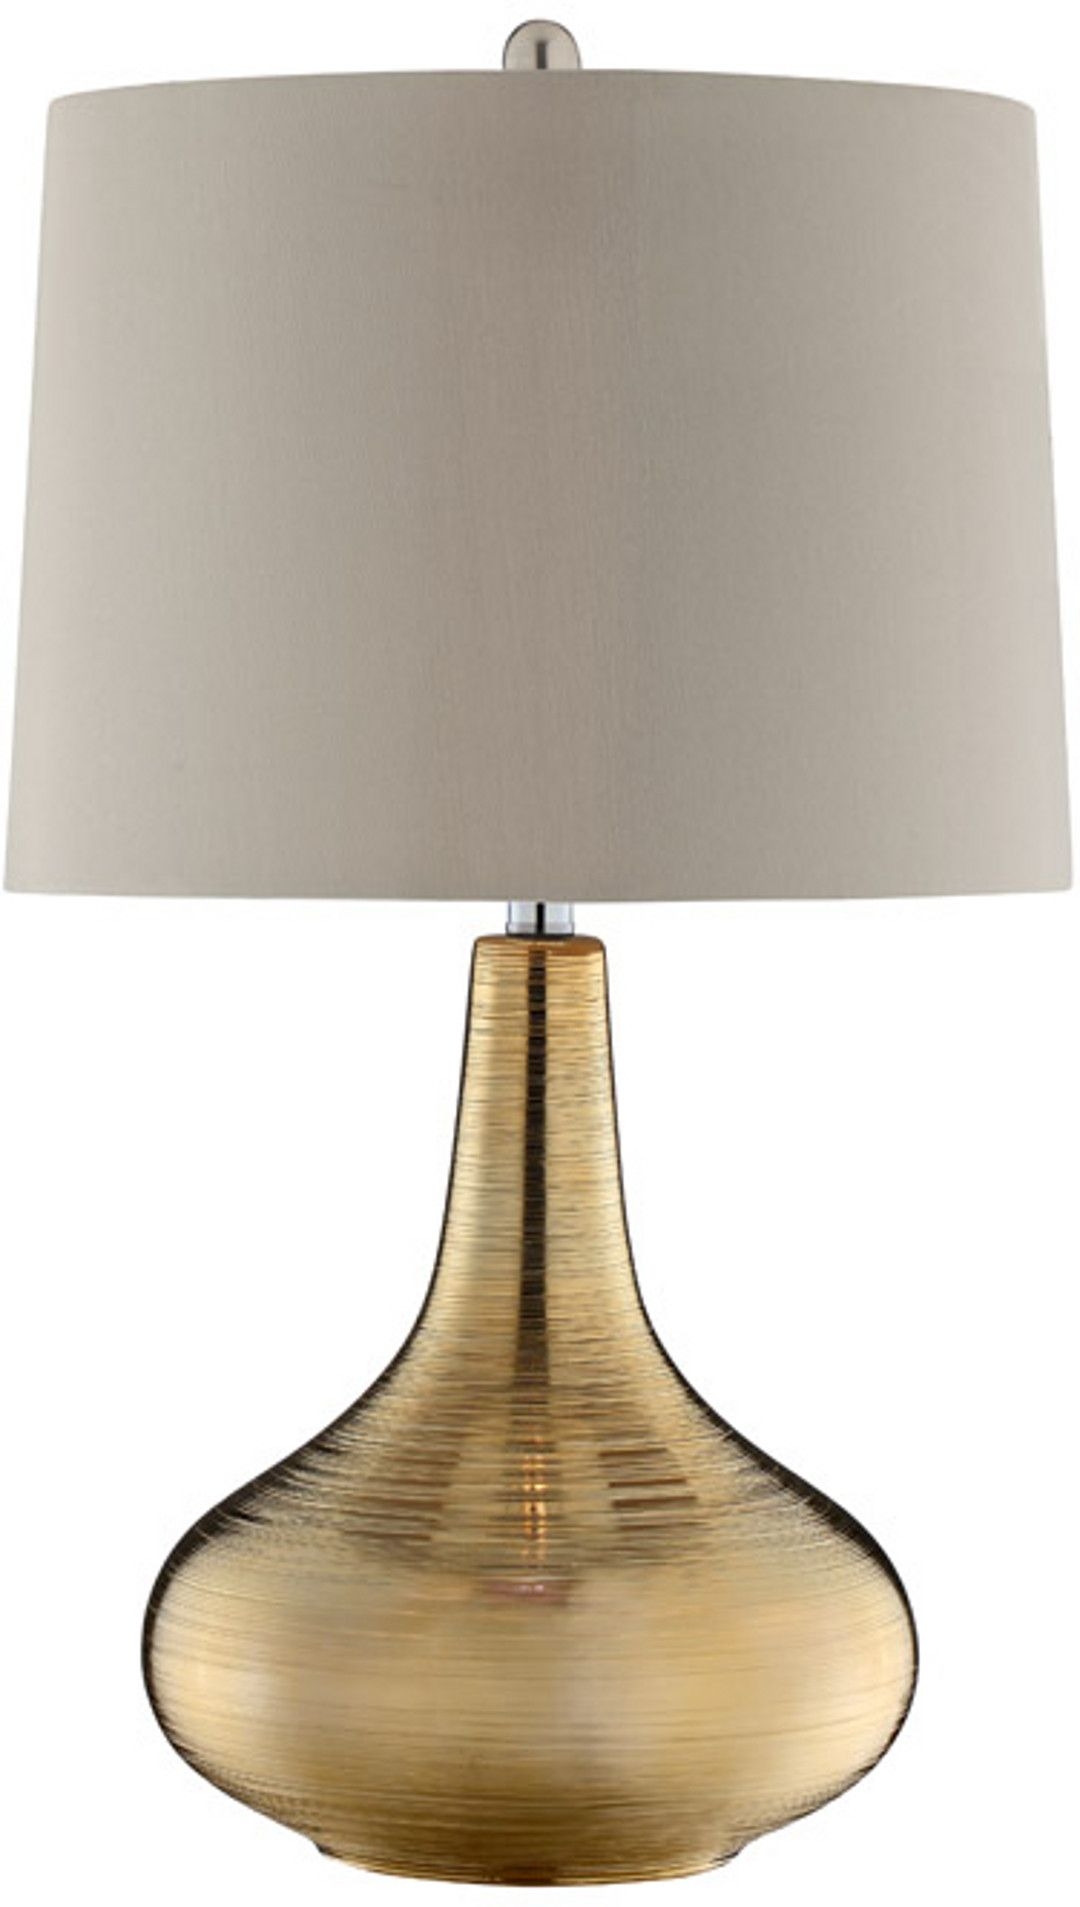 gold base table lamps